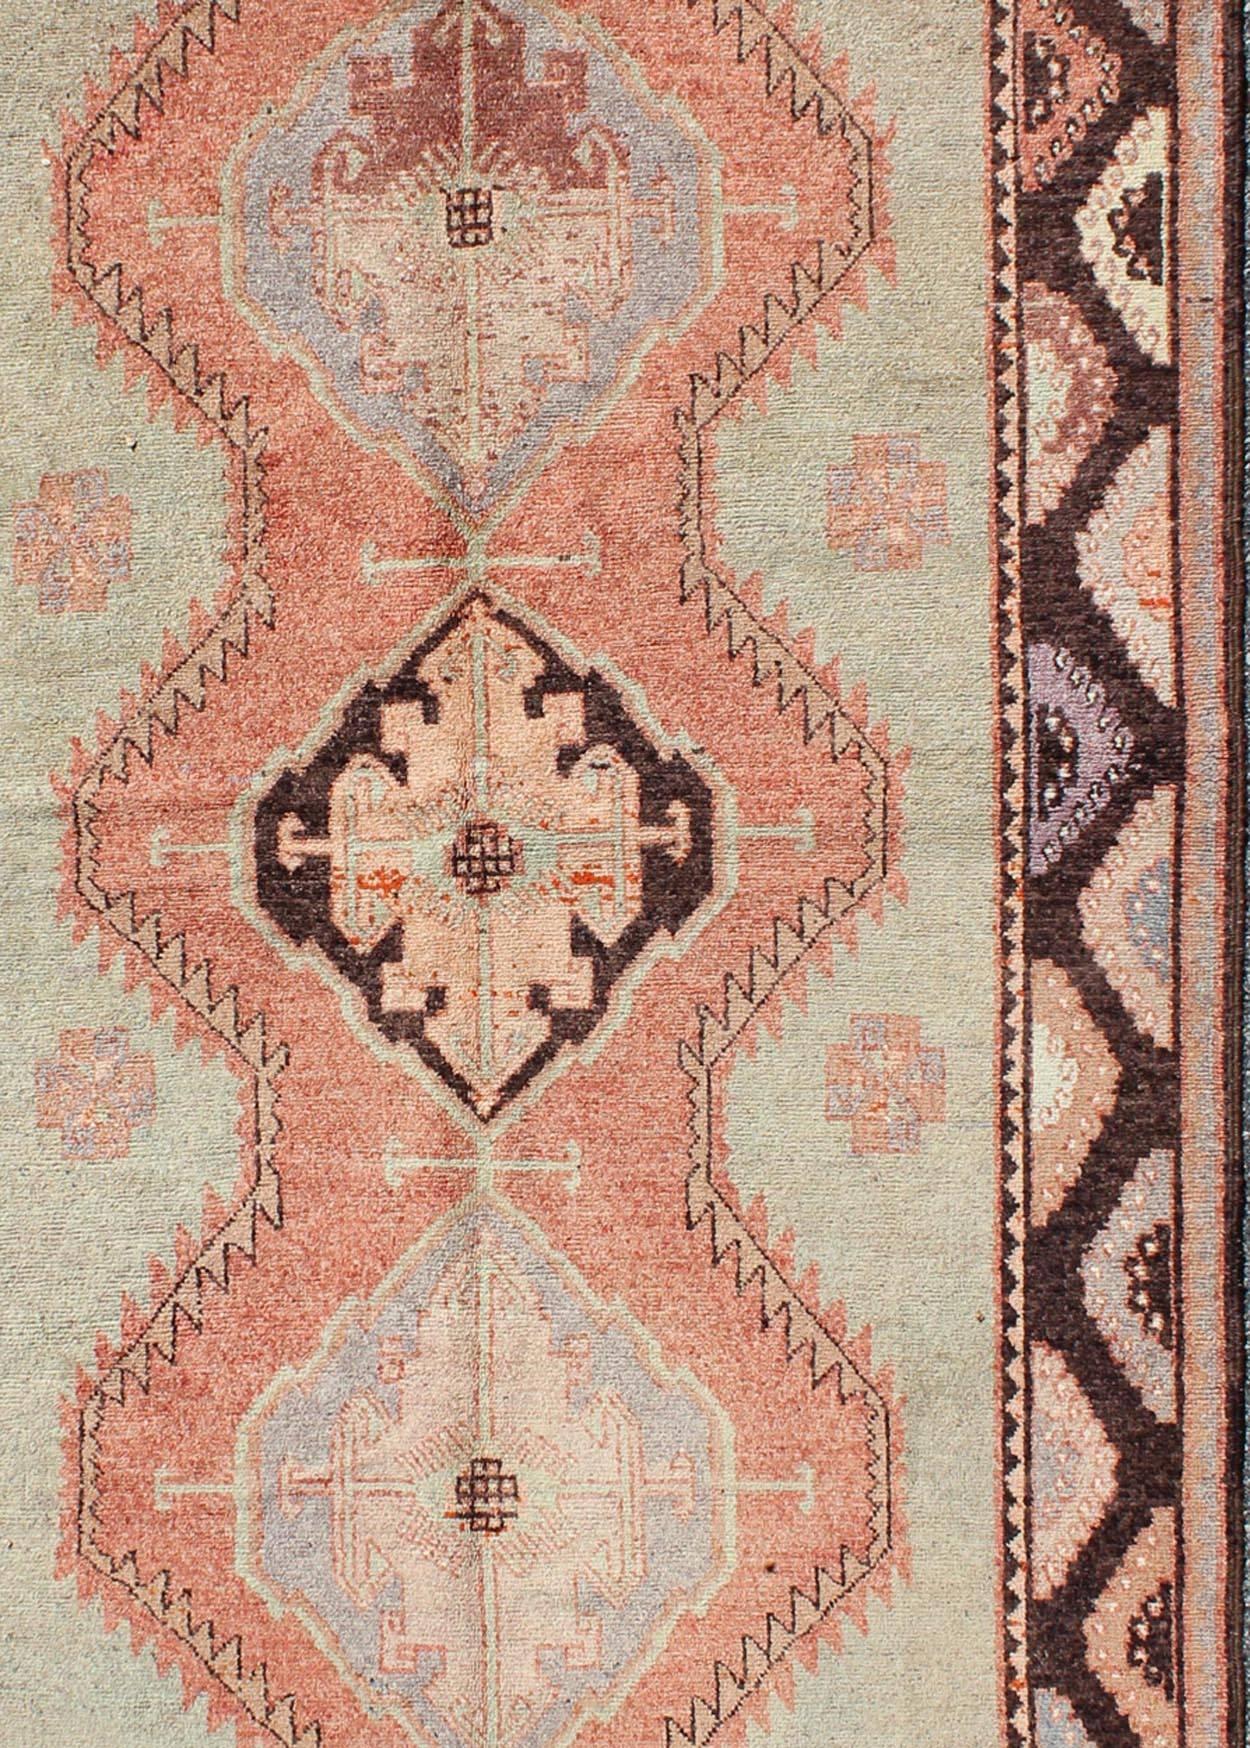 Turkish Oushak Rug with Geometric in Tangerine, Green and Brown In Excellent Condition For Sale In Atlanta, GA